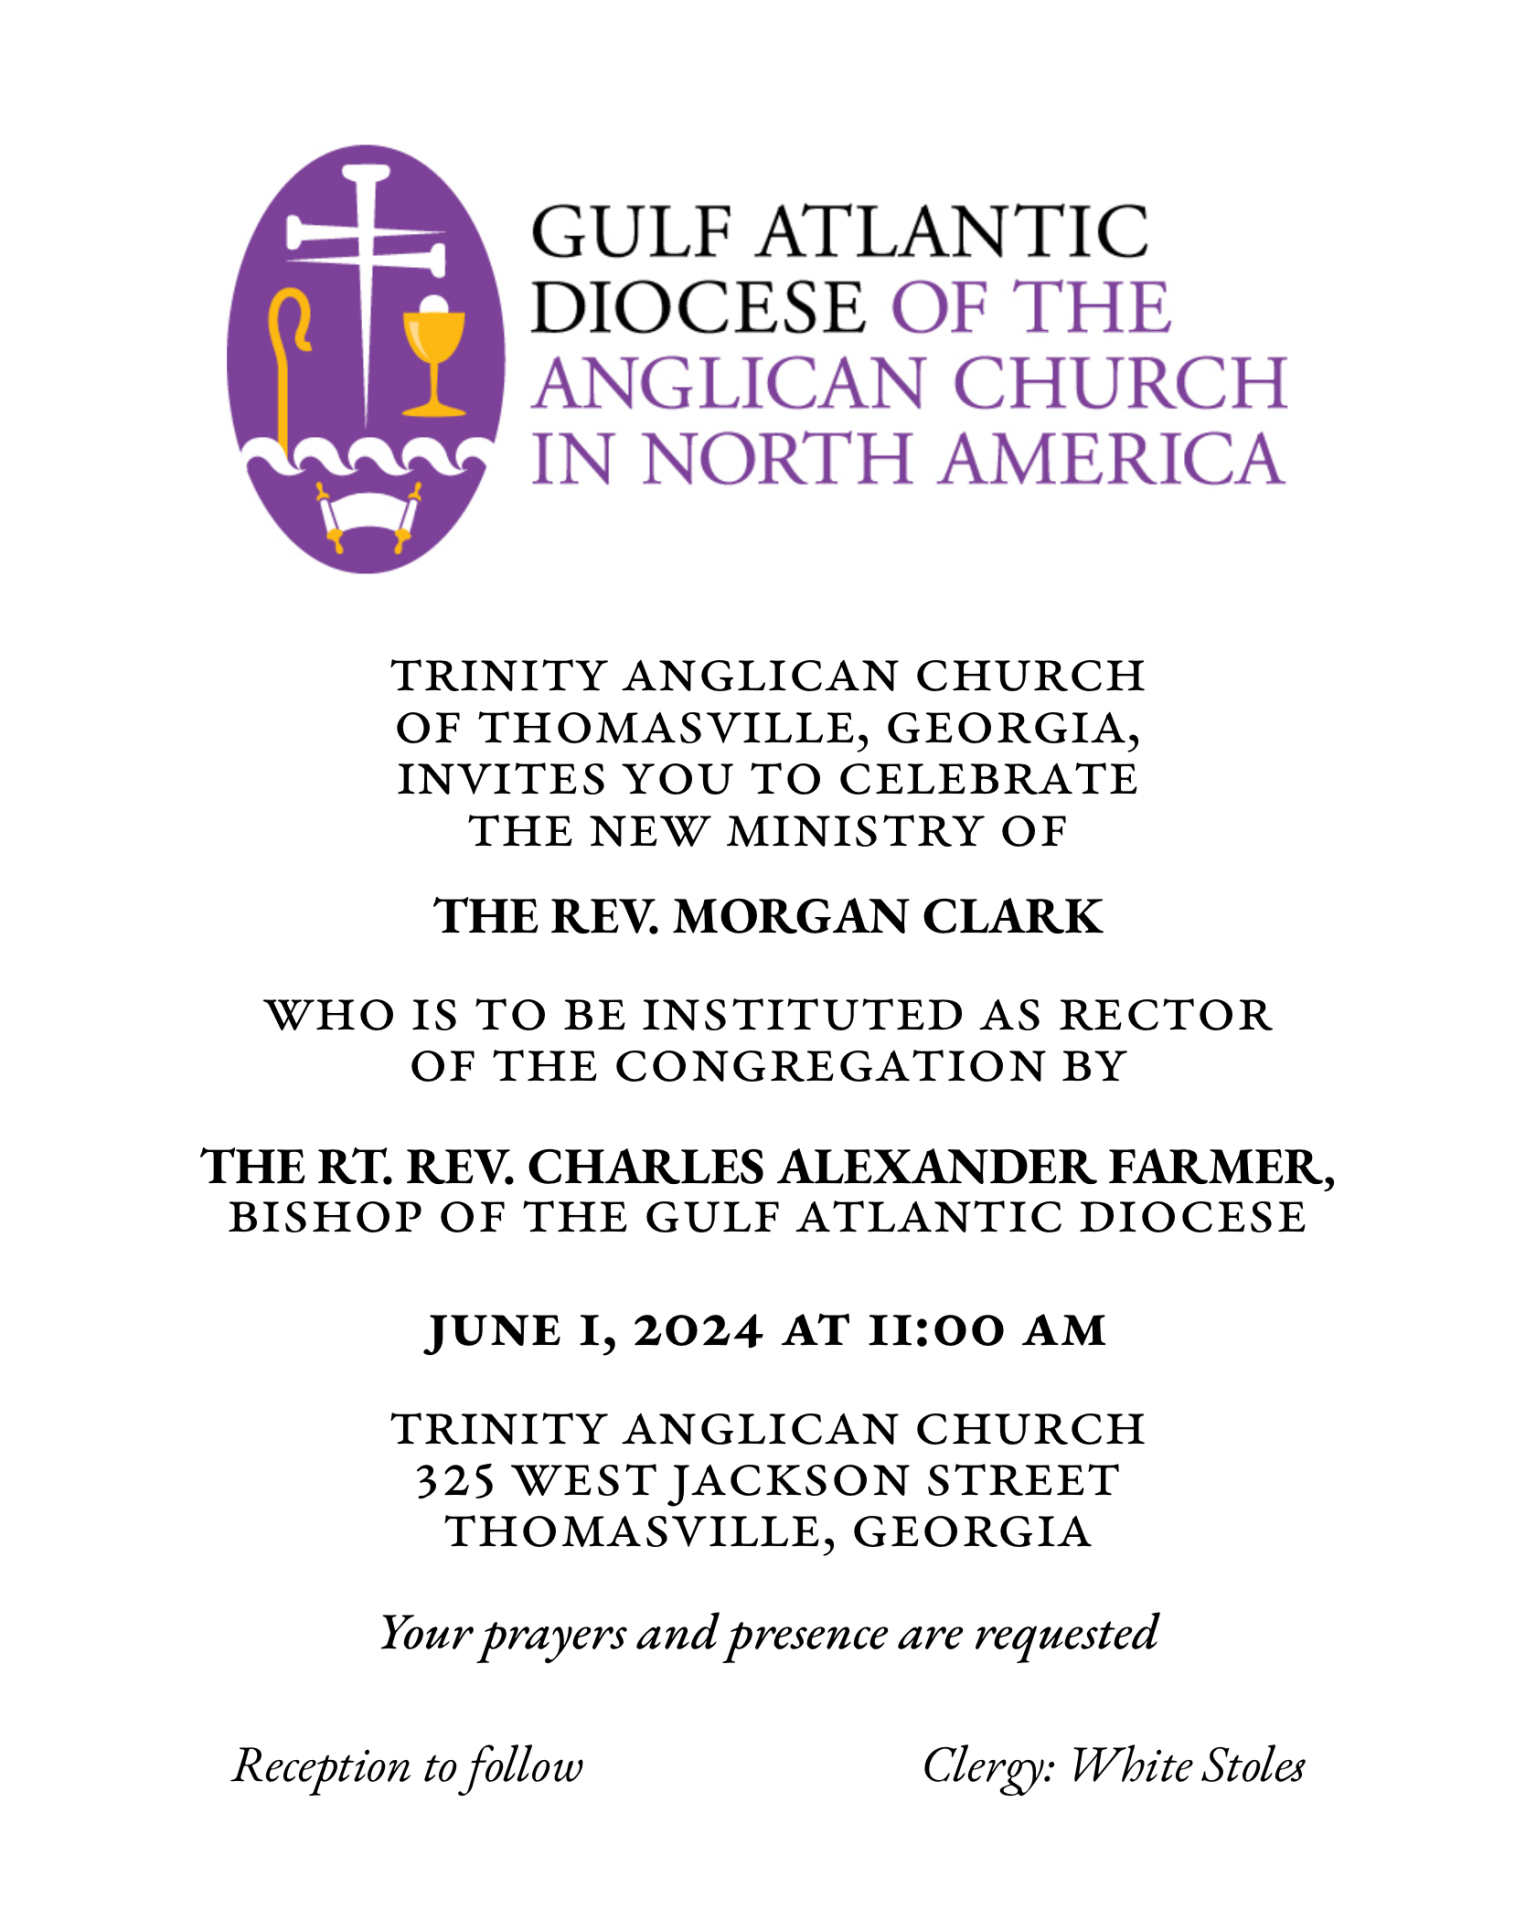 Trinity Anglican Church of Thomasville, Georgia, invites you to celebrate the new ministry of Fr. Morgan Clark, who is to be instituted as rector of the congregation by Bishop Alex Farmer June 1, 2024 at 11:00 a.m.